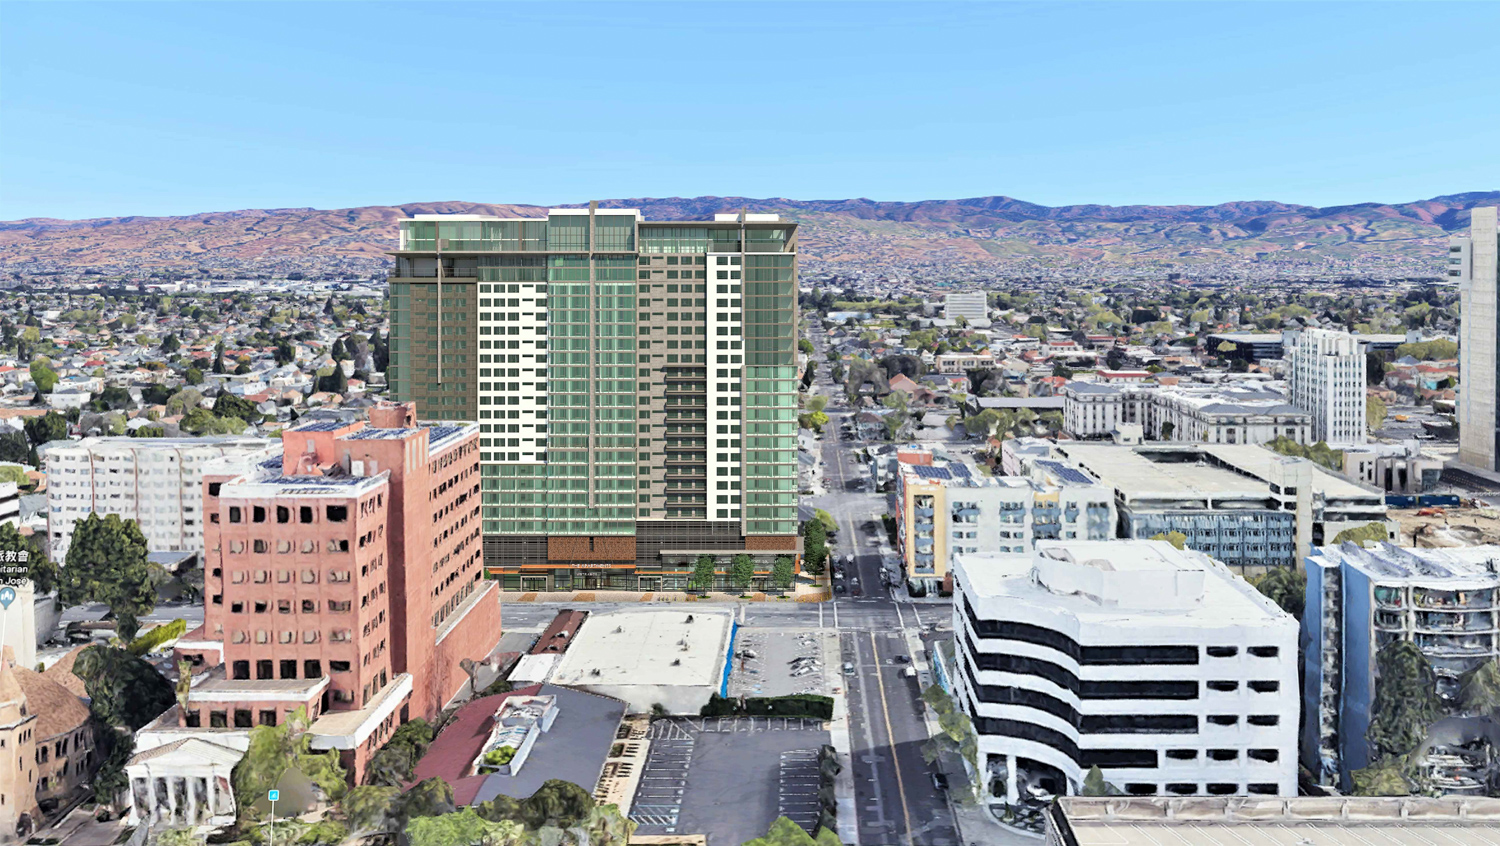 Student Housing at 100 North 4th Street skyline view looking east, rendering by LPMD Architects